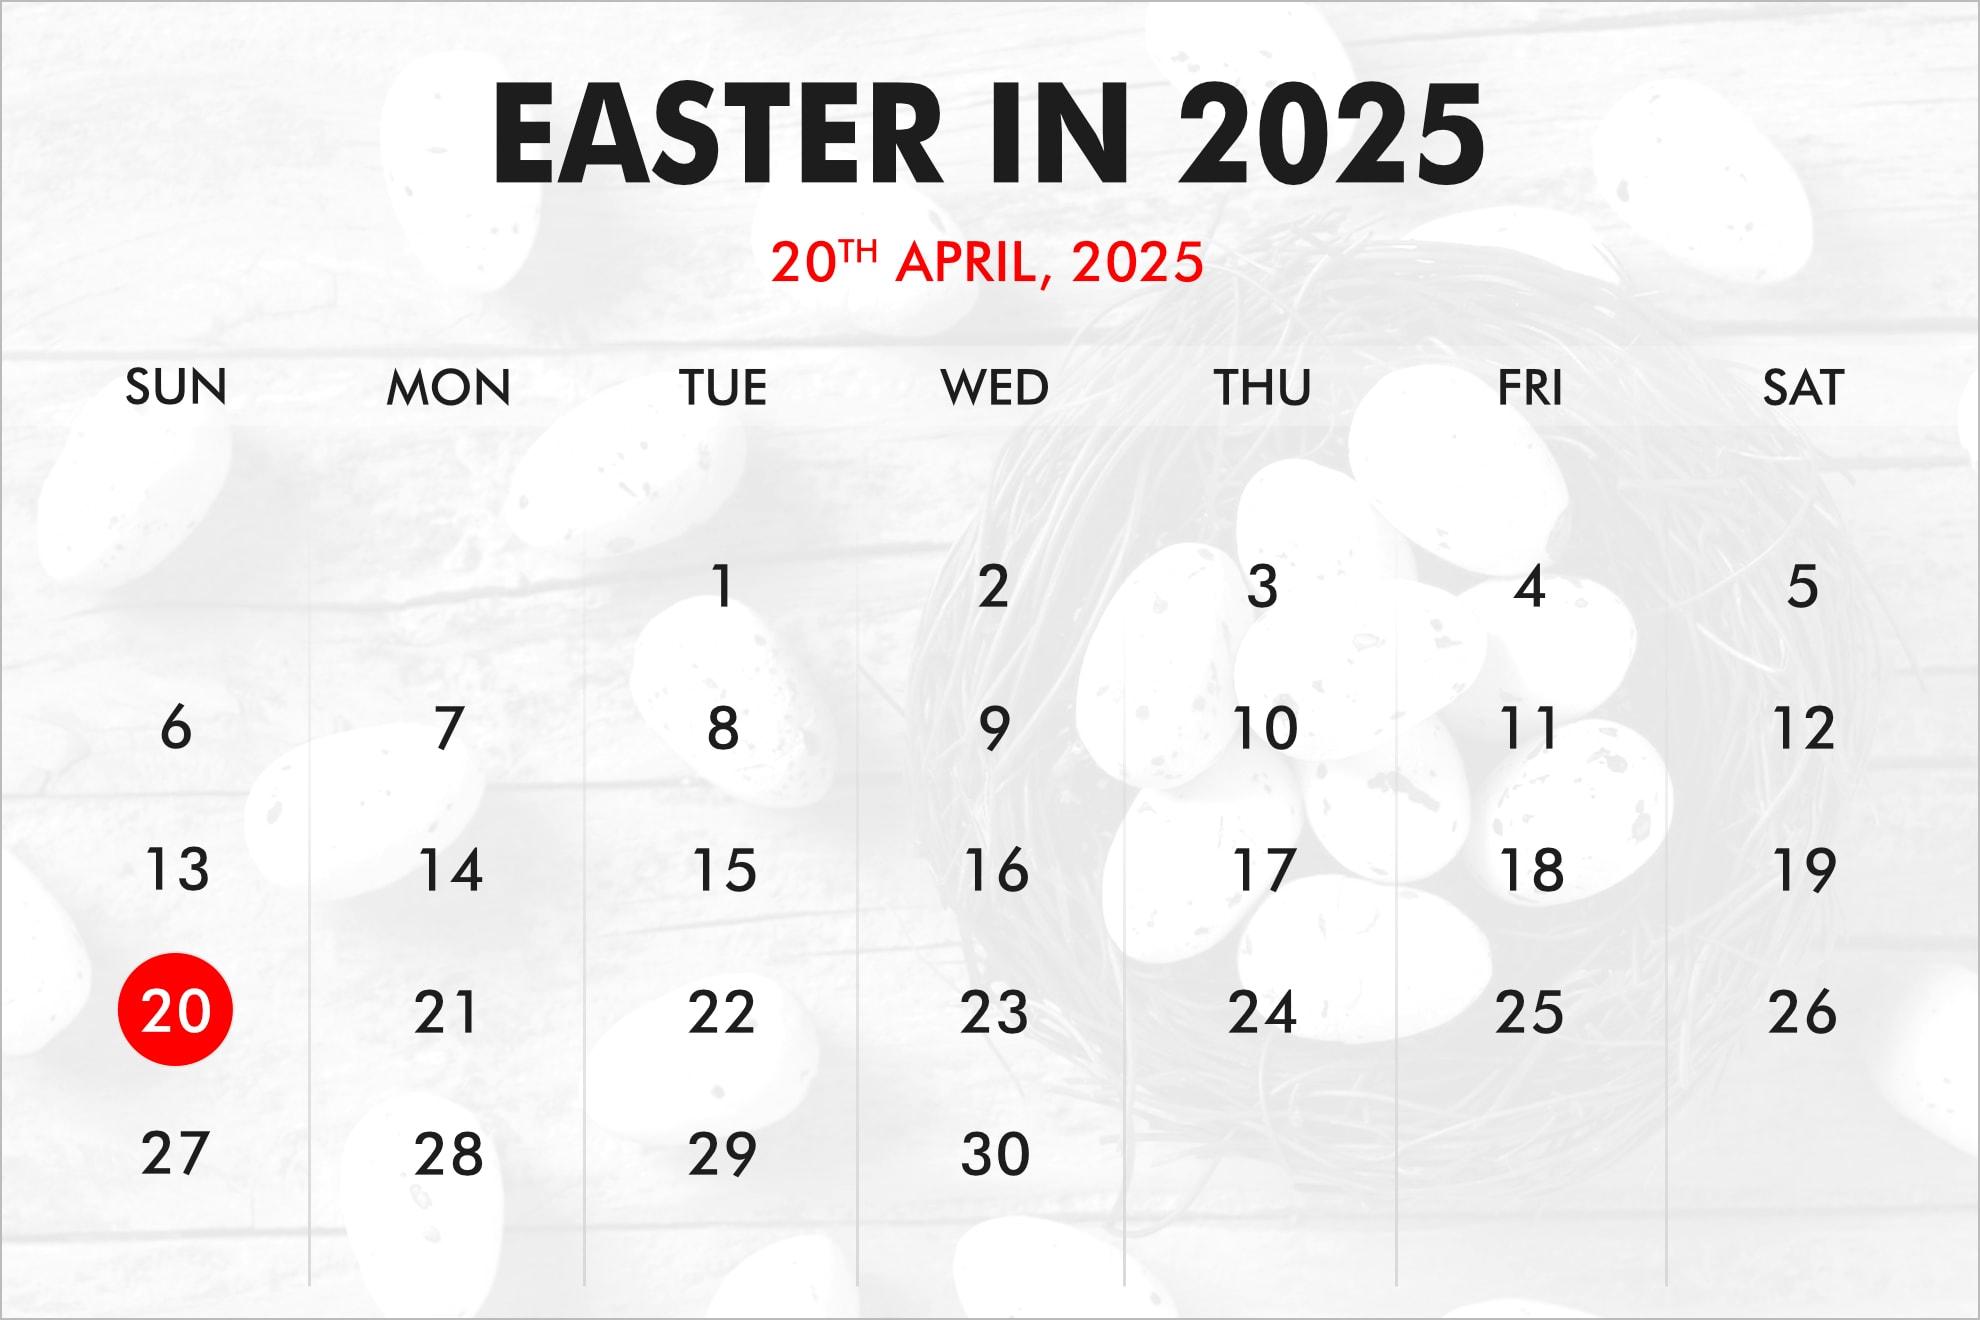 When is Easter in 2023, 2024, 2025?